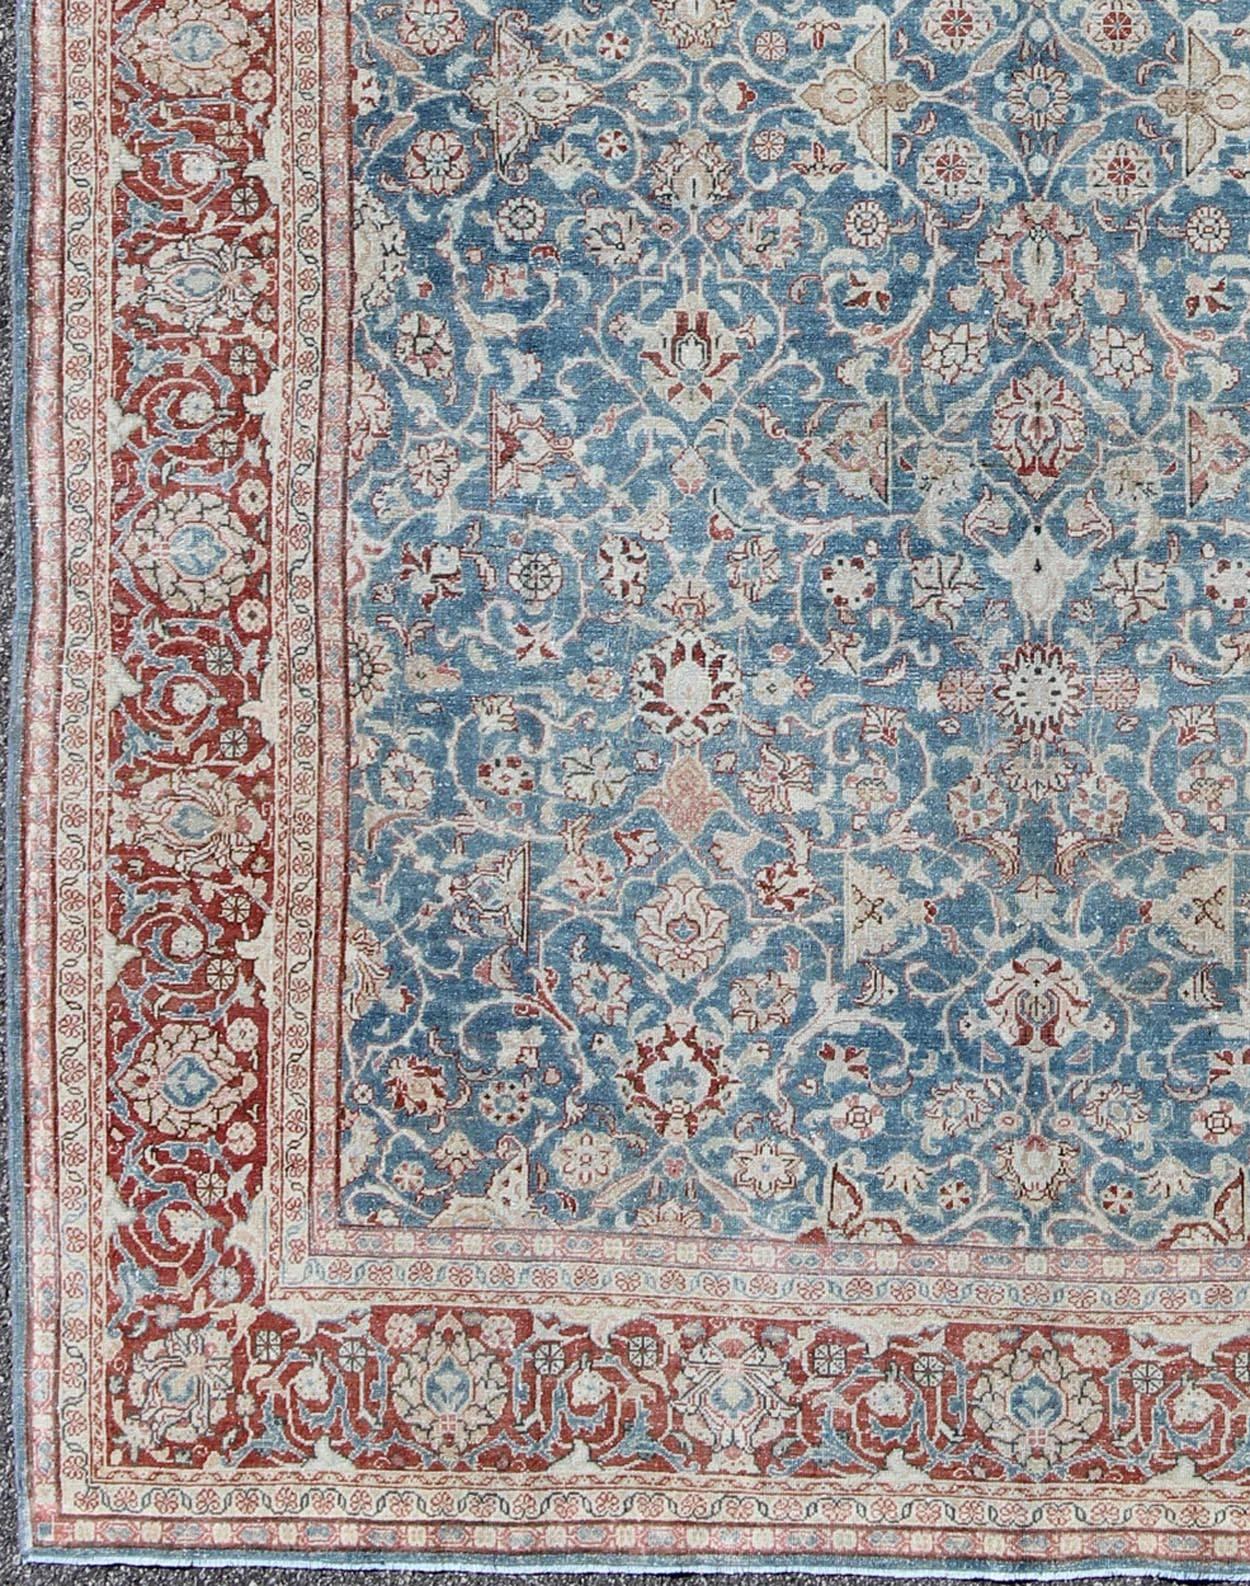 Blue and gray antique Persian Malayer rug with all-over design and ornate borders, rug sus-1803-93, country of origin / type: Iran / Malayer, circa 1910

This antique Persian Malayer rug was handwoven in the early 20th century (circa 1910) and